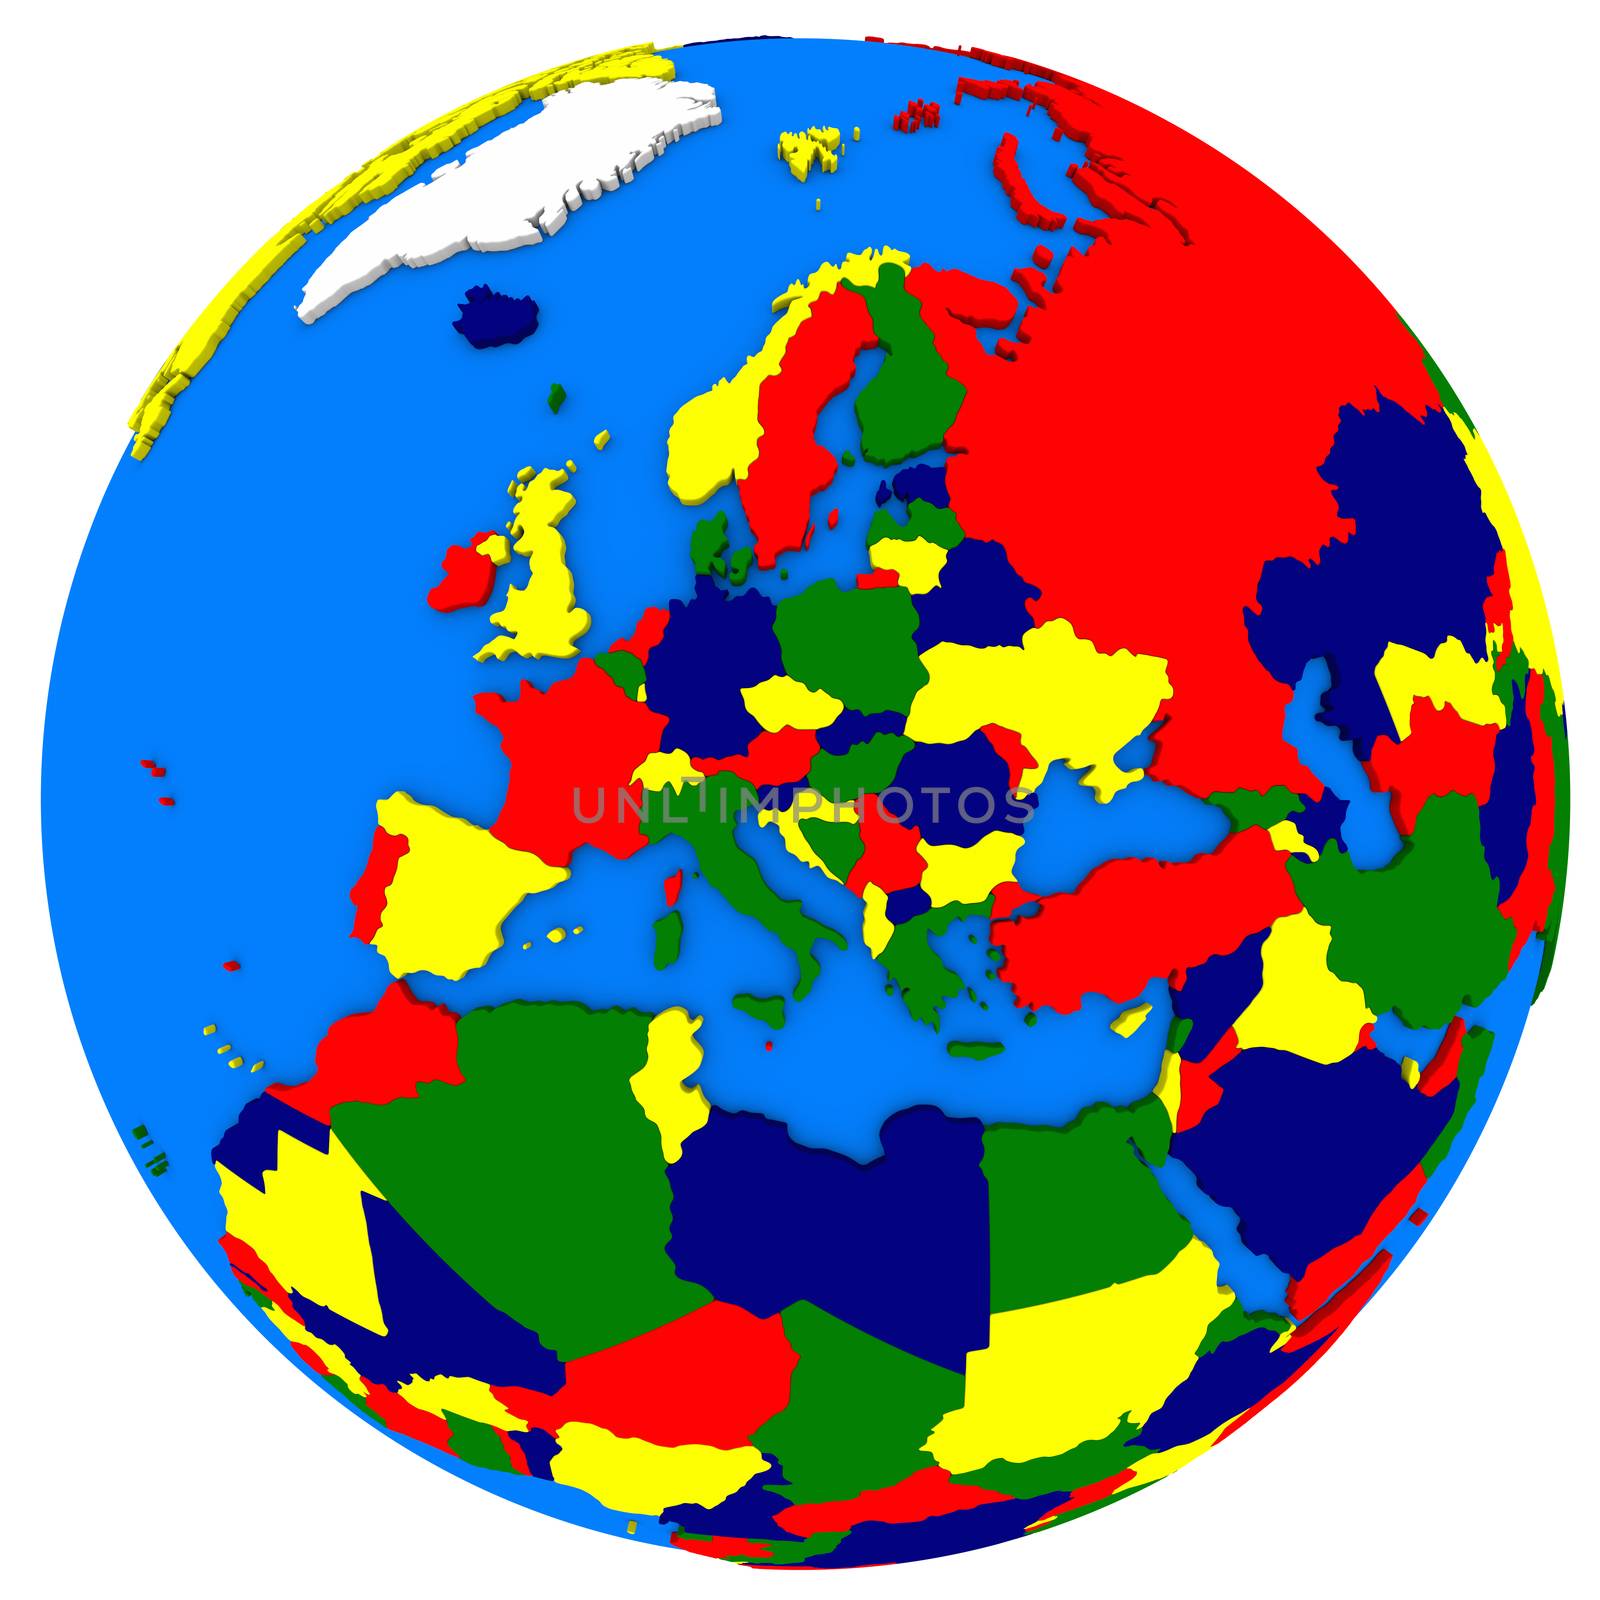 Europe on Earth political map by Harvepino